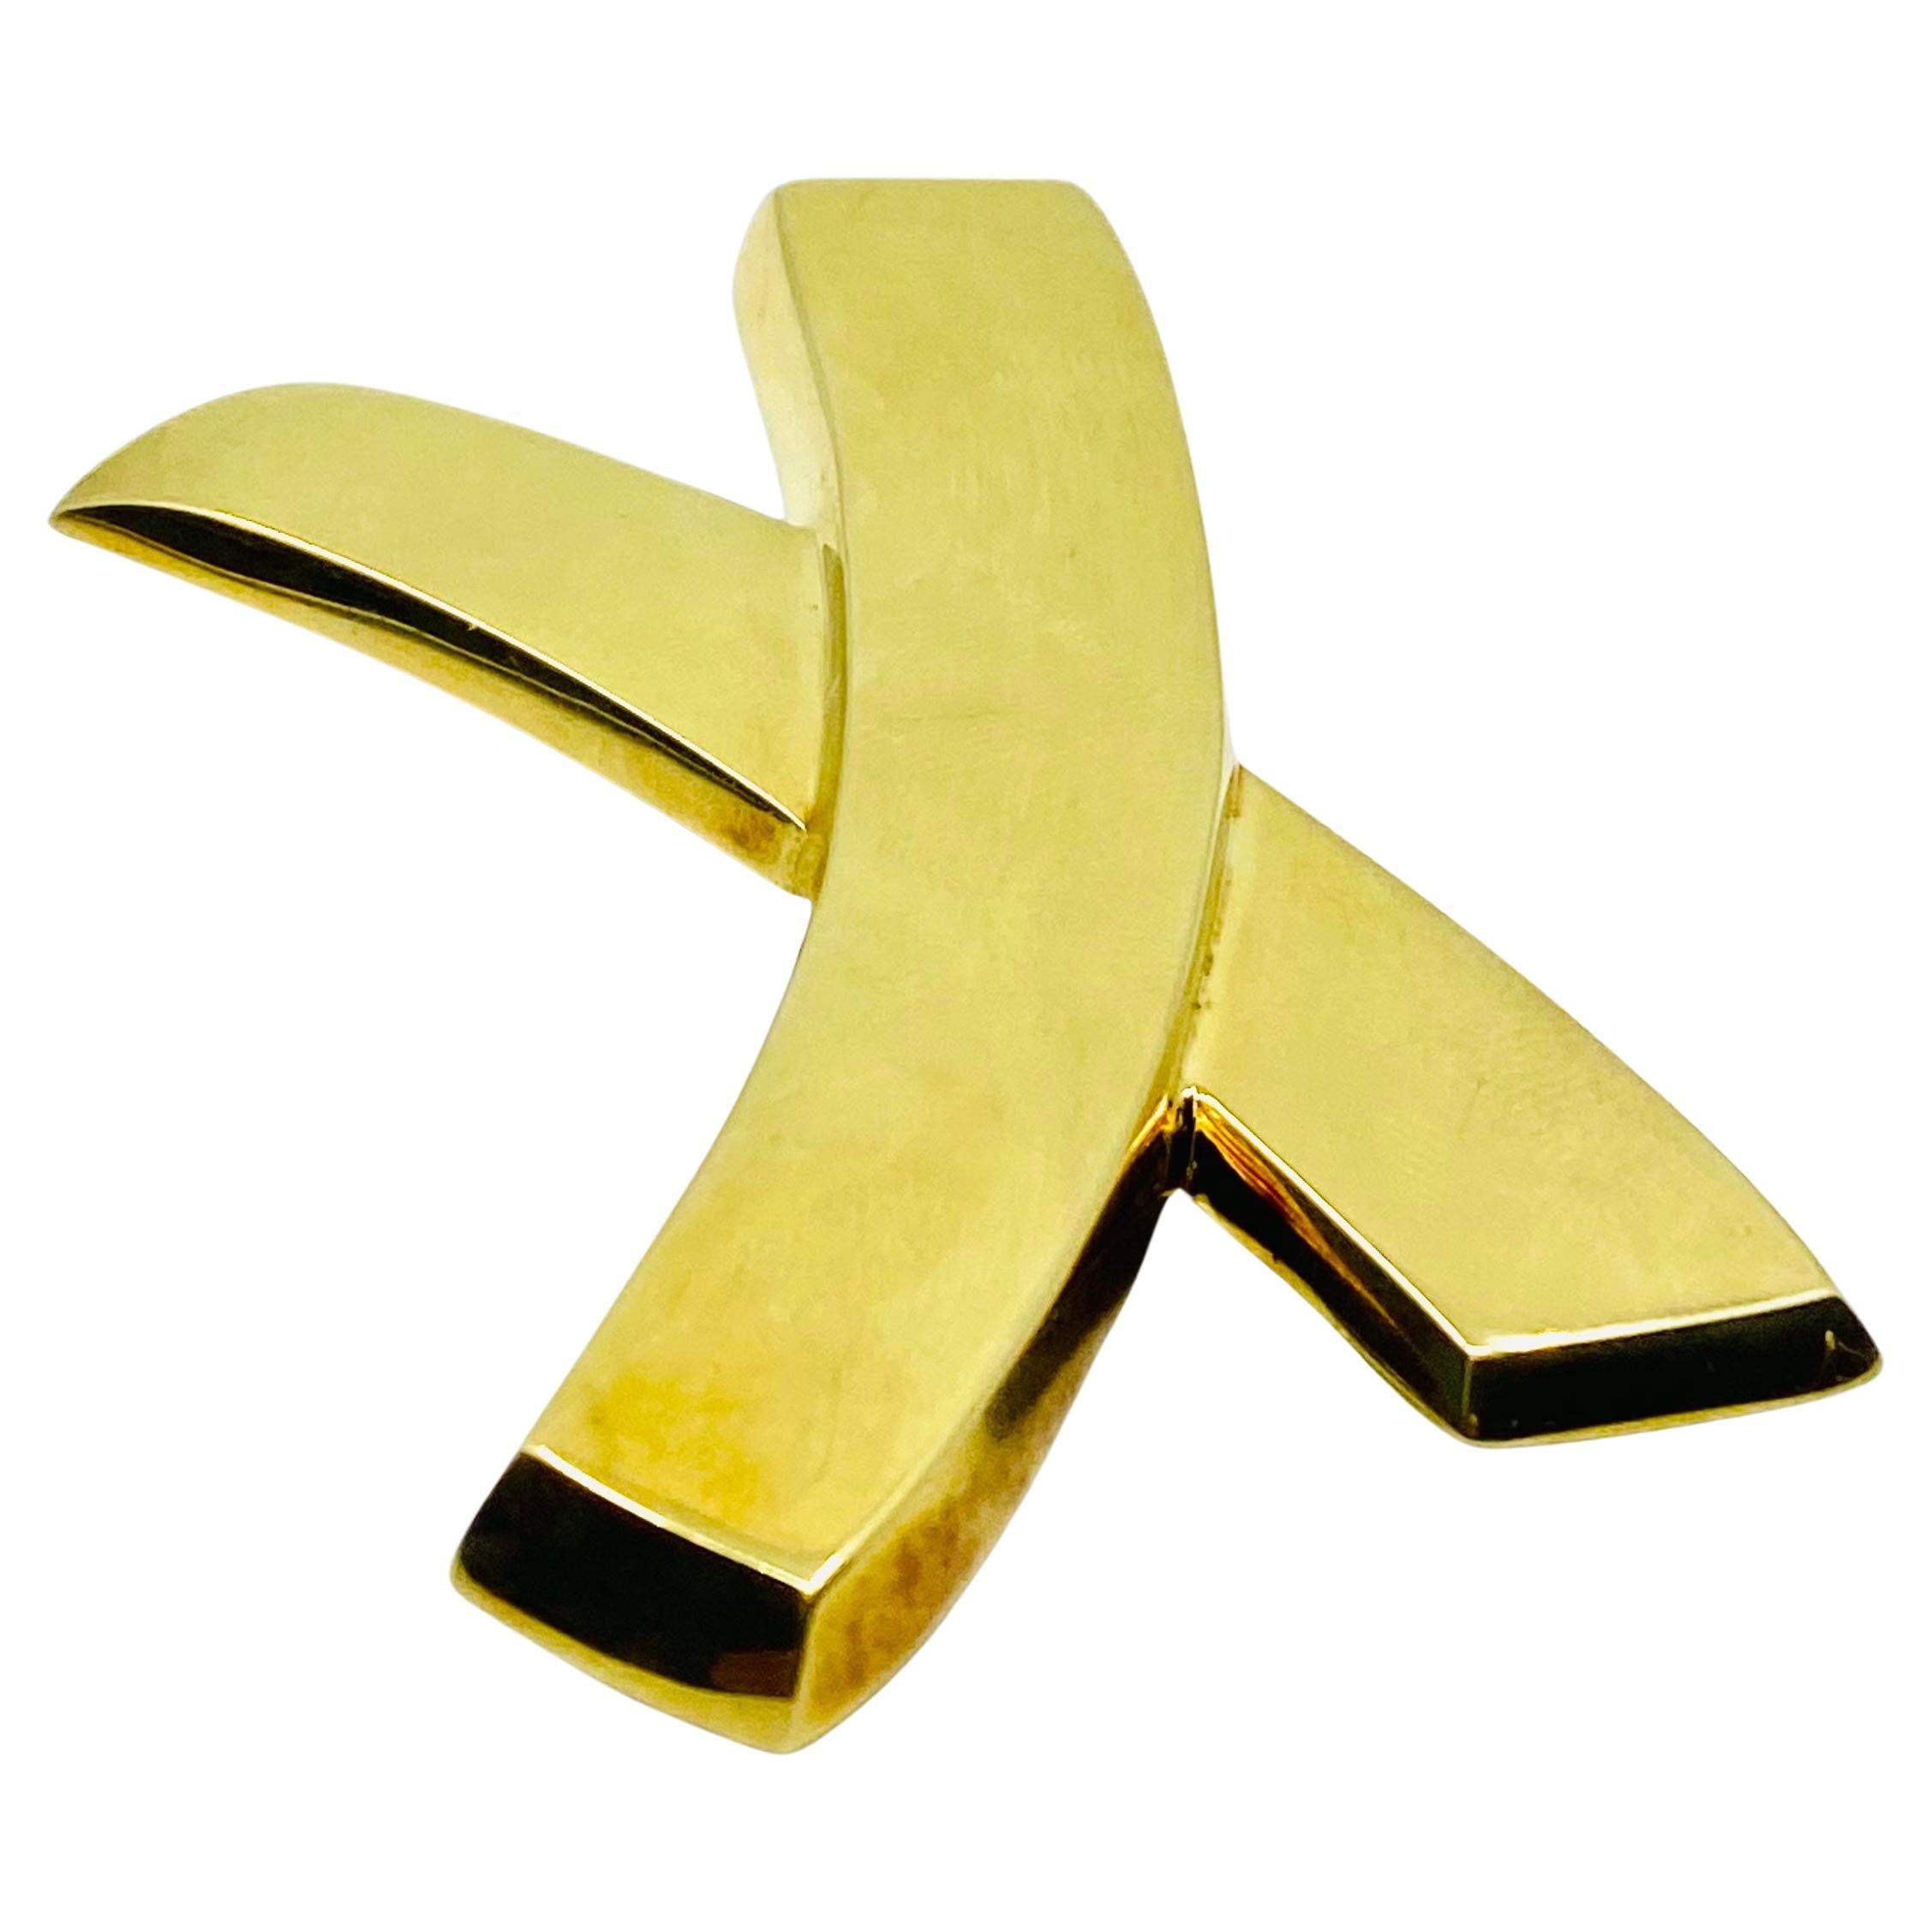 Tiffany & Co. Paloma Picasso Graffiti X Brooch Pin In Excellent Condition For Sale In Beverly Hills, CA